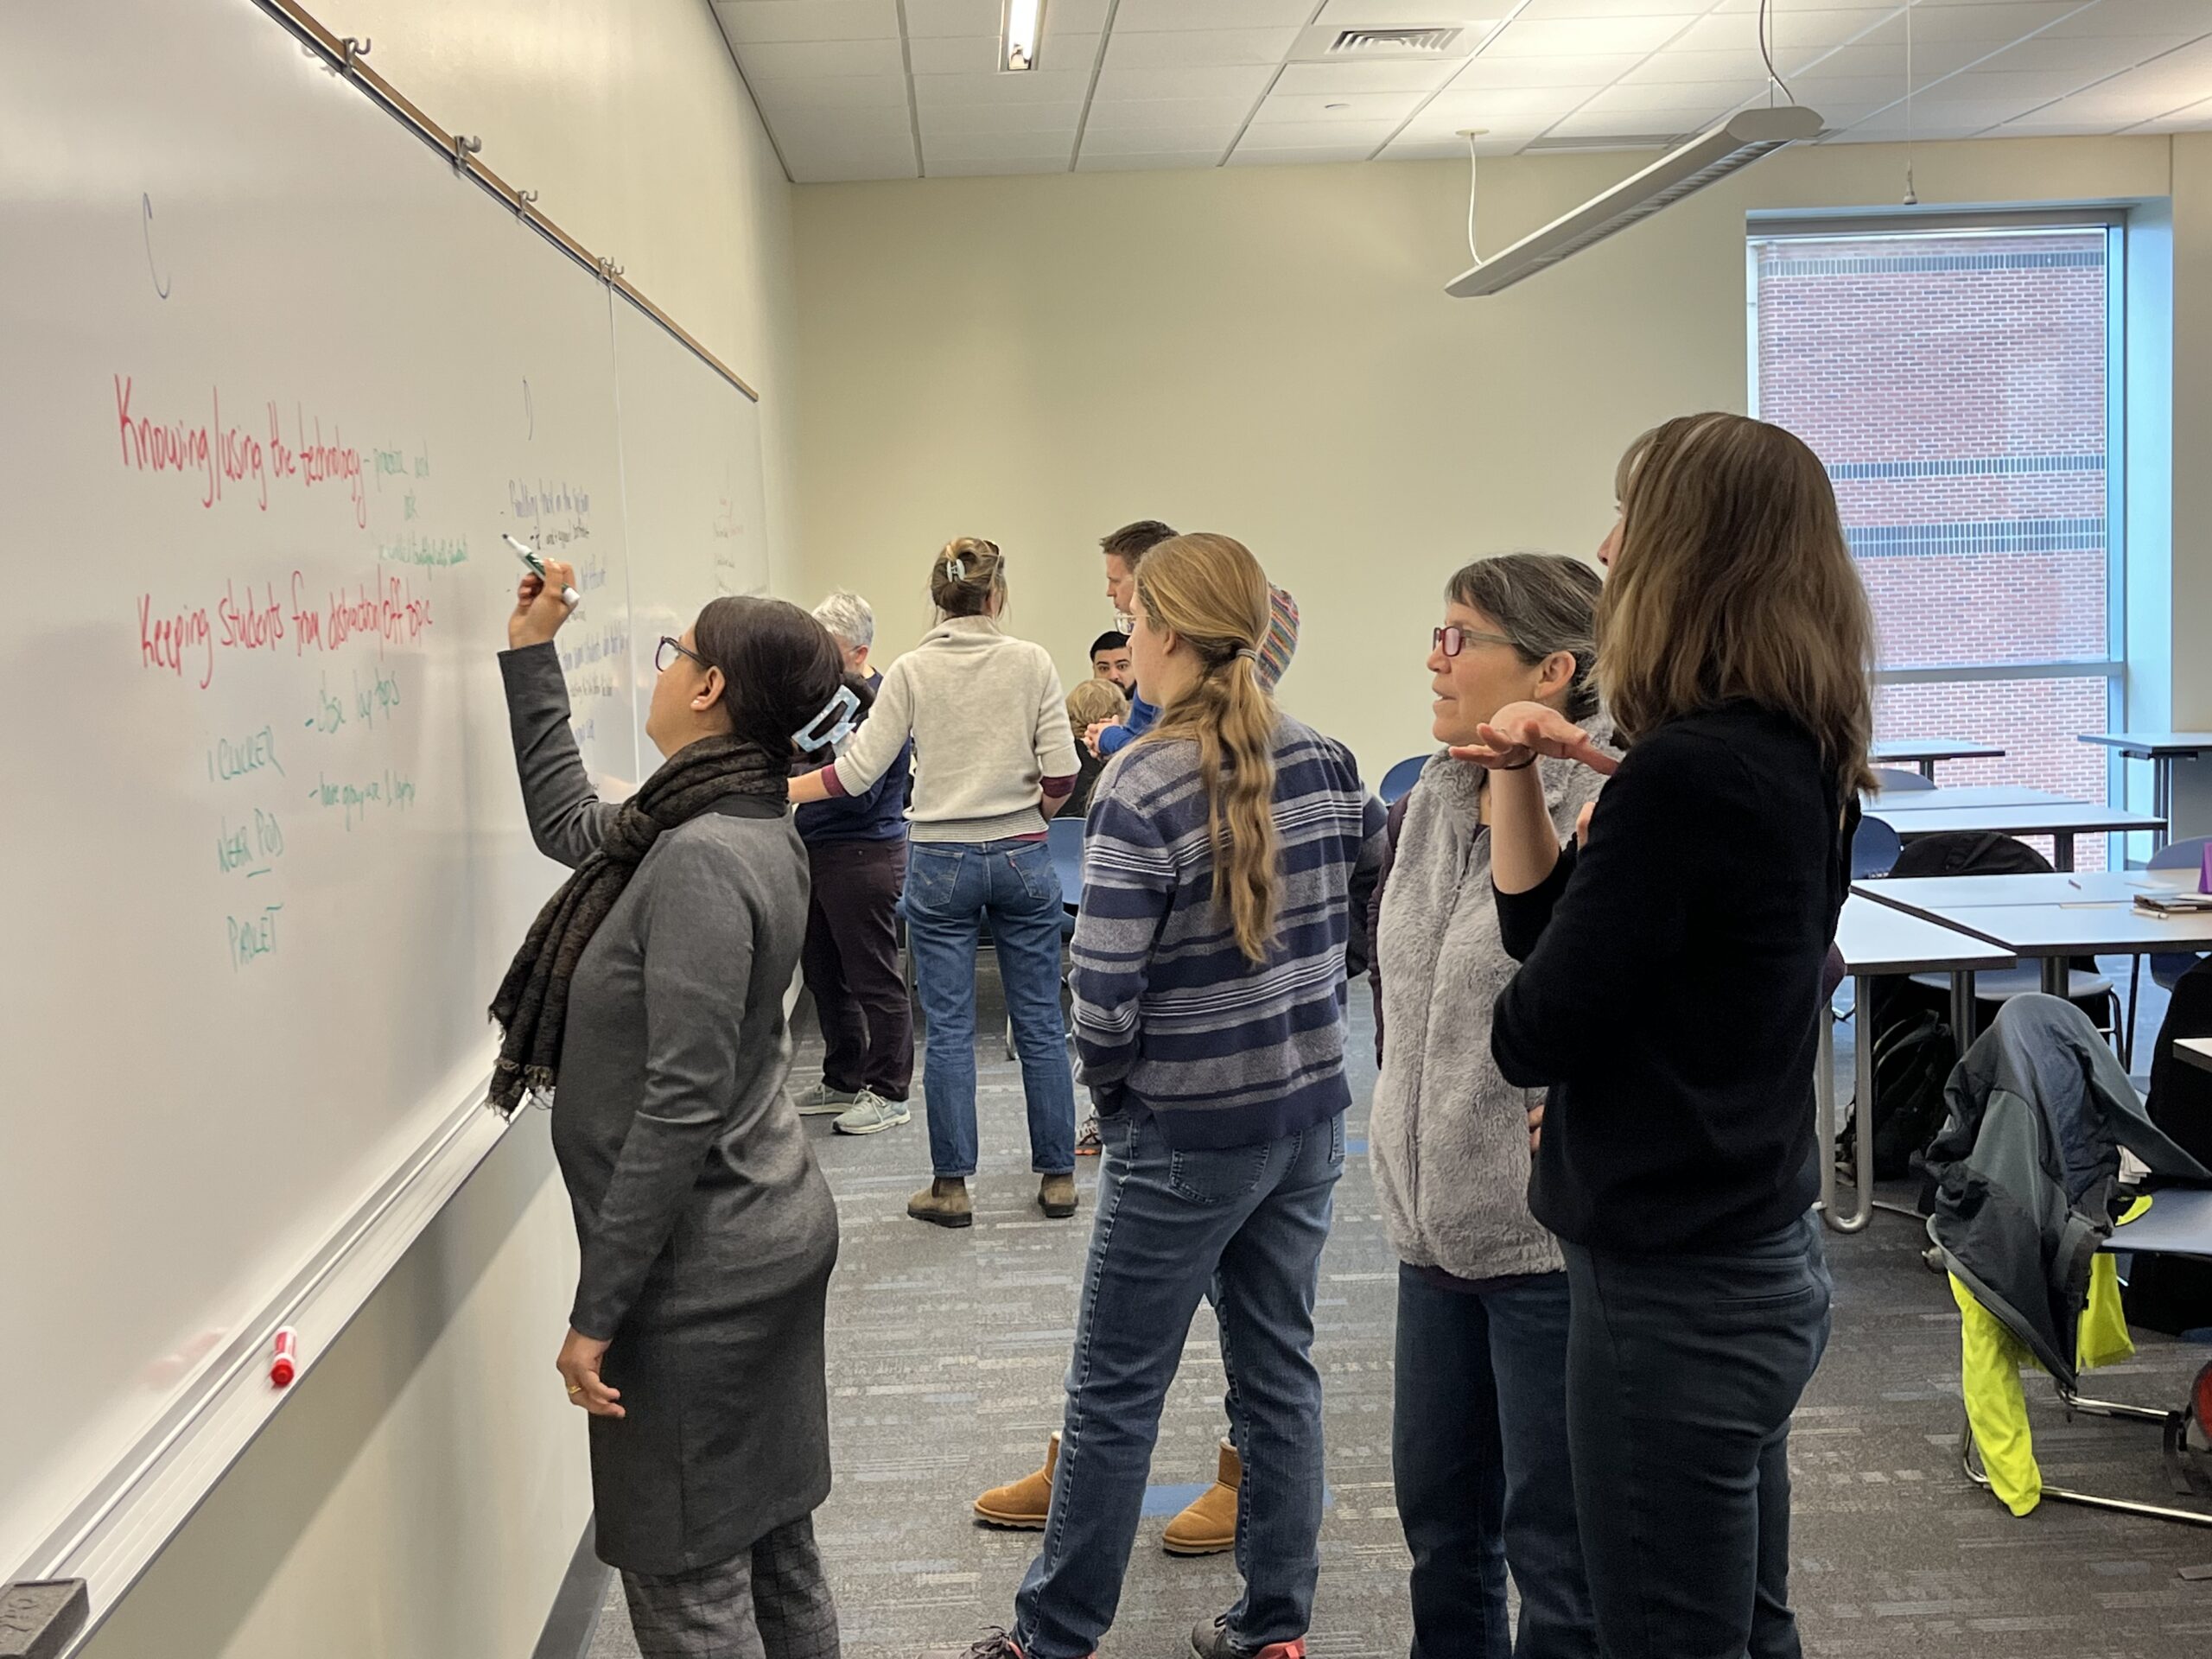 Faculty write on whiteboard during workshop